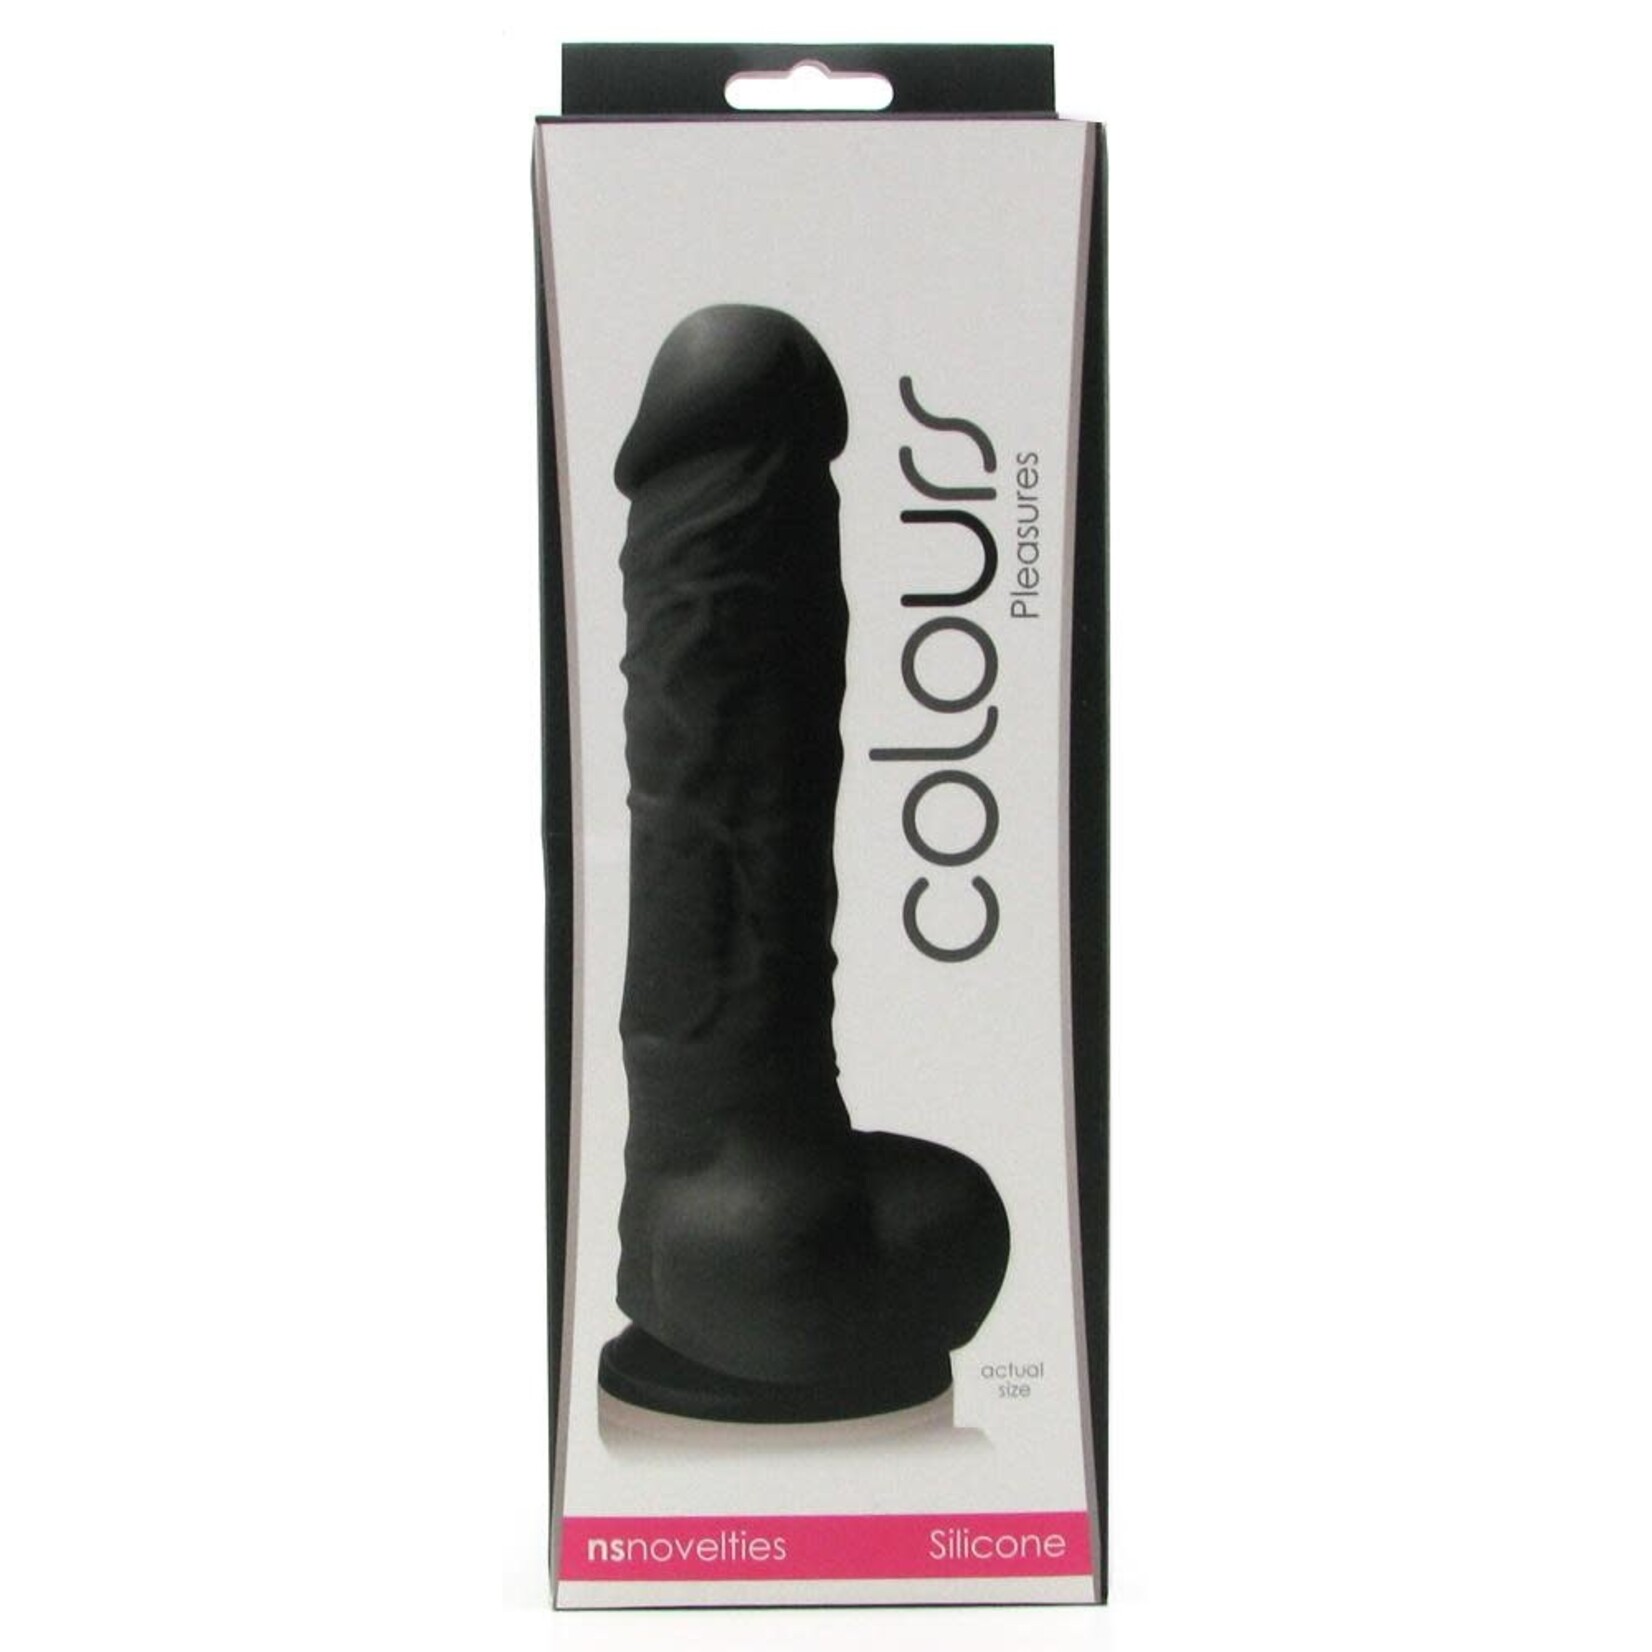 NSNOVELTIES SMALL SILICONE COLOURS DILDO IN BLACK